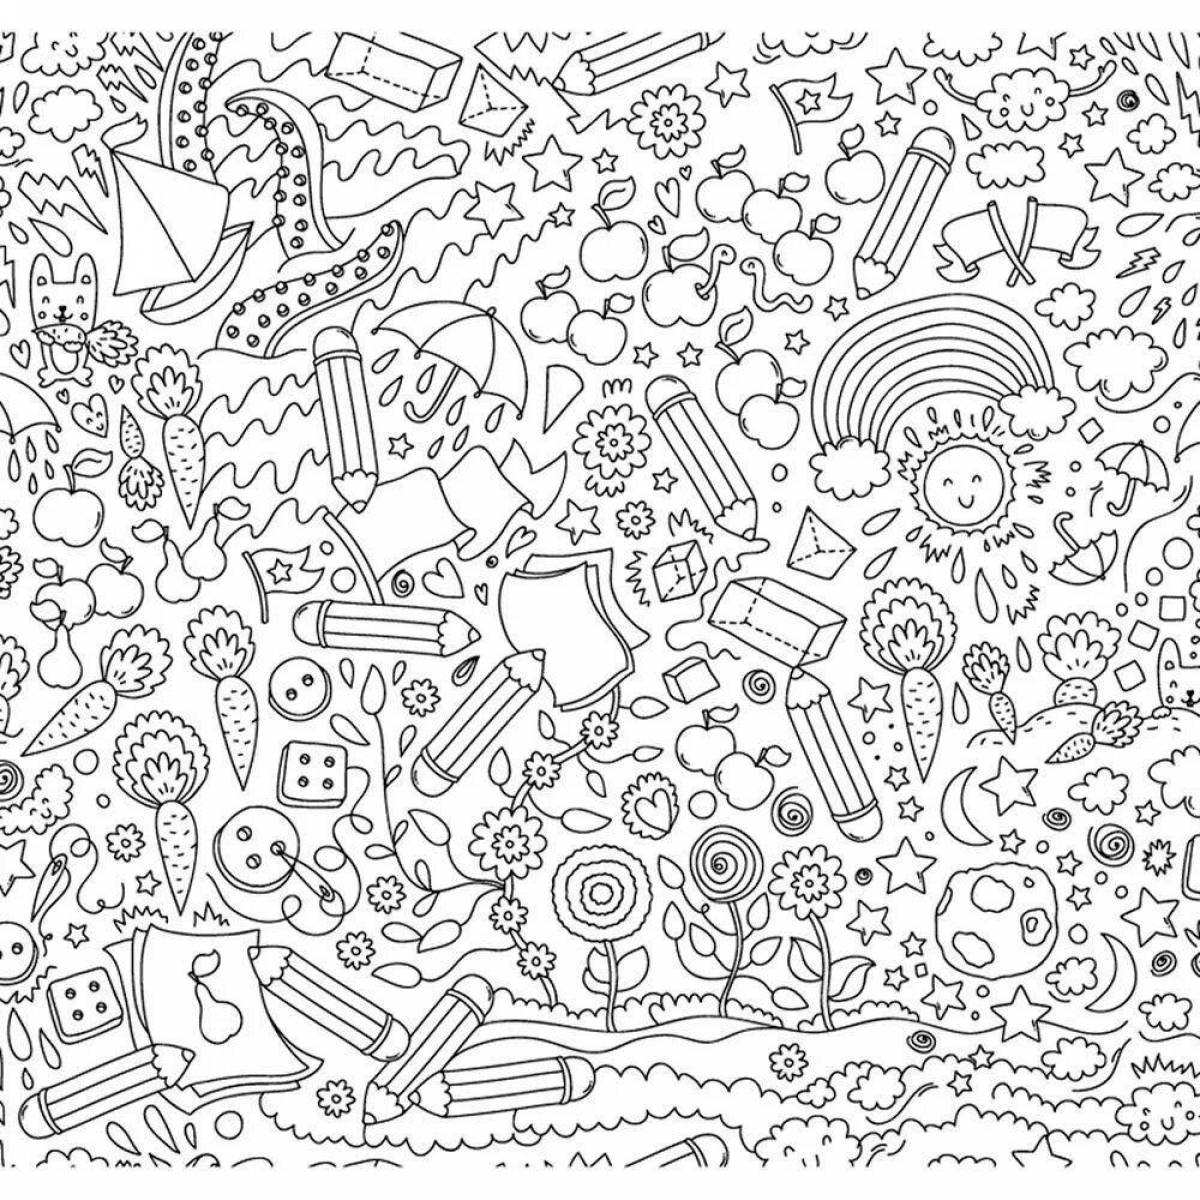 Great coloring book with detailed design